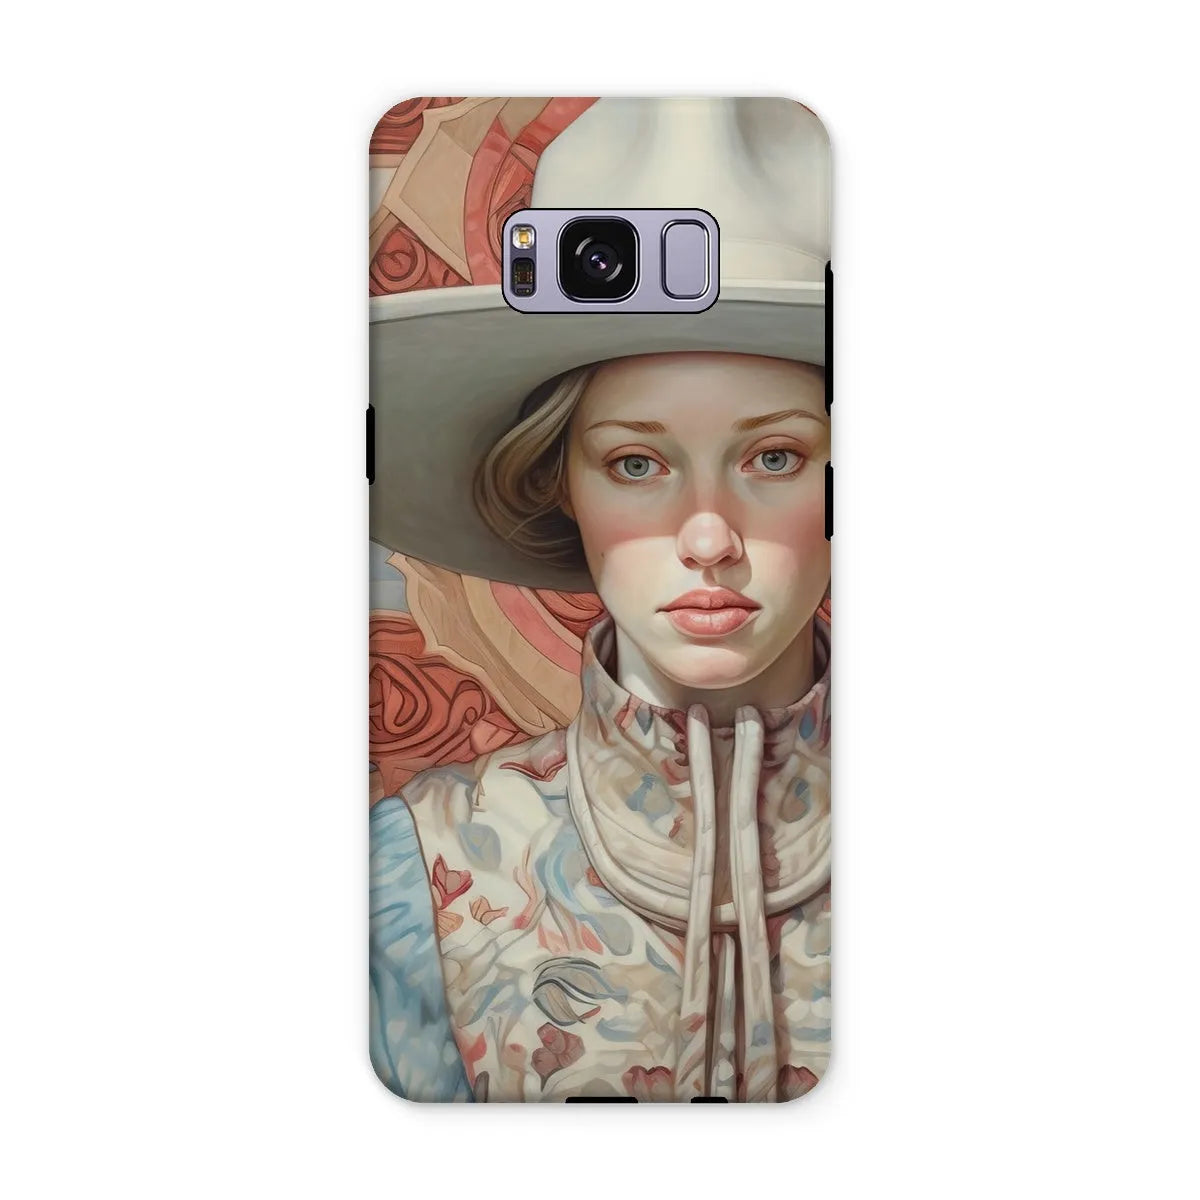 Lottie The Lesbian Cowgirl - Sapphic Art Phone Case - Samsung Galaxy S8 Plus / Matte - Mobile Phone Cases - Aesthetic